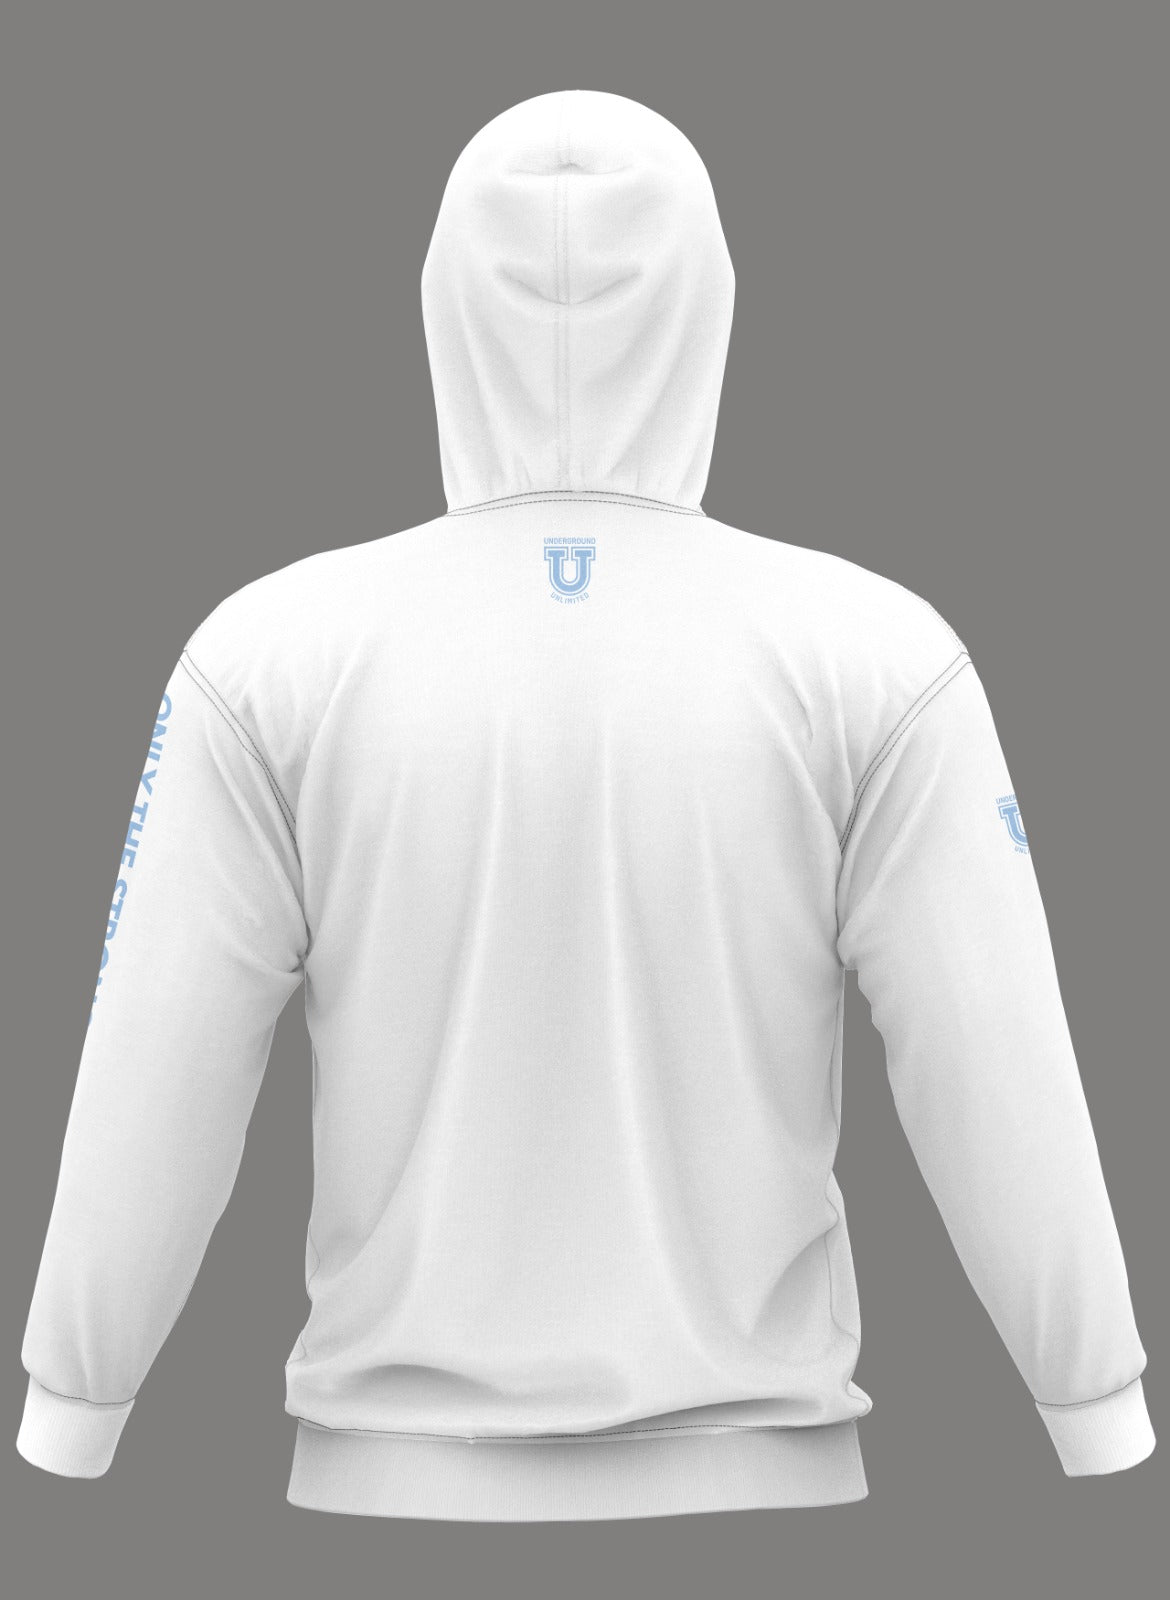 W.T. Chipman Performance Hoodie ~ Spartan White "Only the Strong are Spartans"